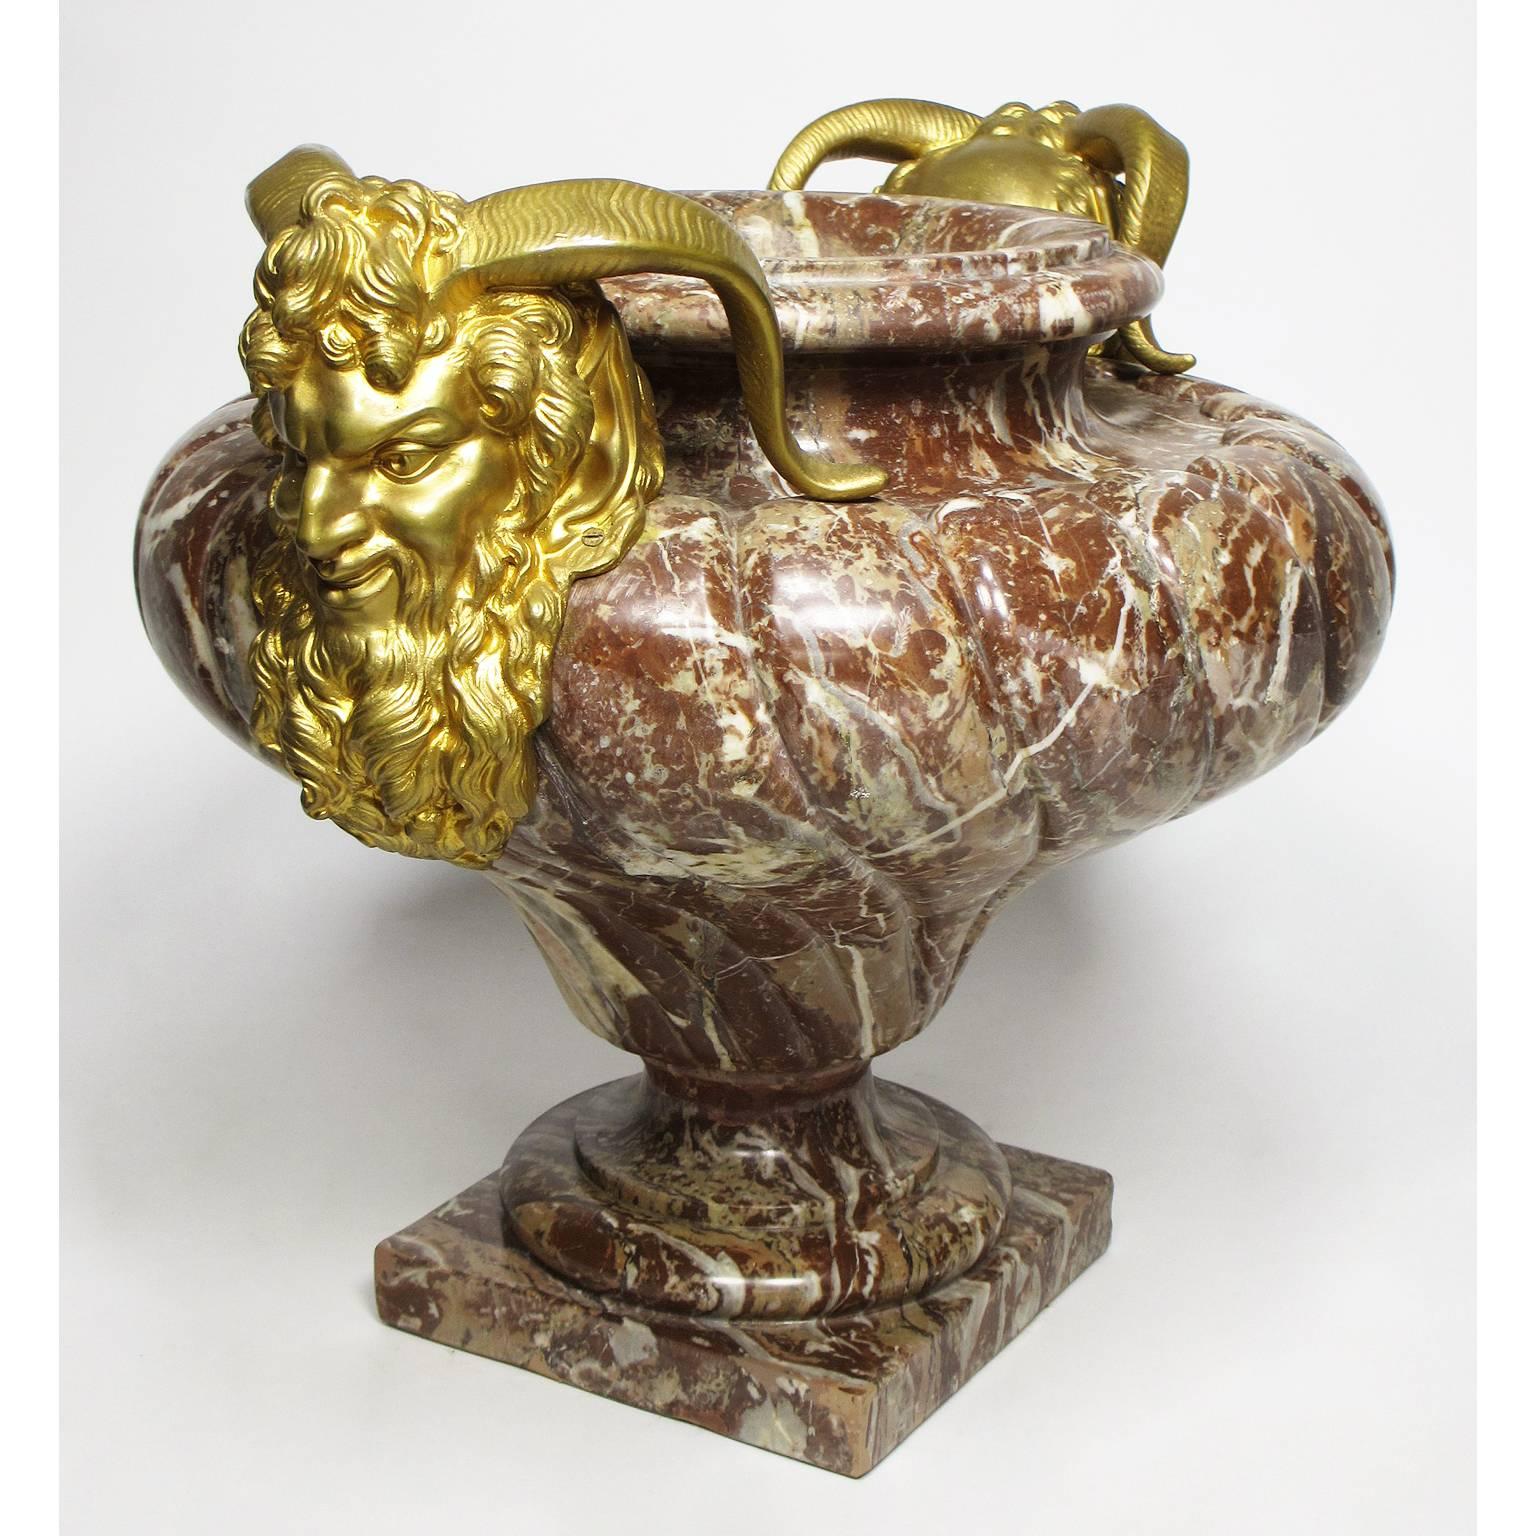 A very fine and French 19th century Louis XV style carved rouge-royal marble and figural gilt bronze-mounted planter-urn, surmounted with a pair of gilt-bronze masks of a Satyr, circa Paris, 1880.

Height: 18 inches (45.7 cm).
Width: 22 3/4